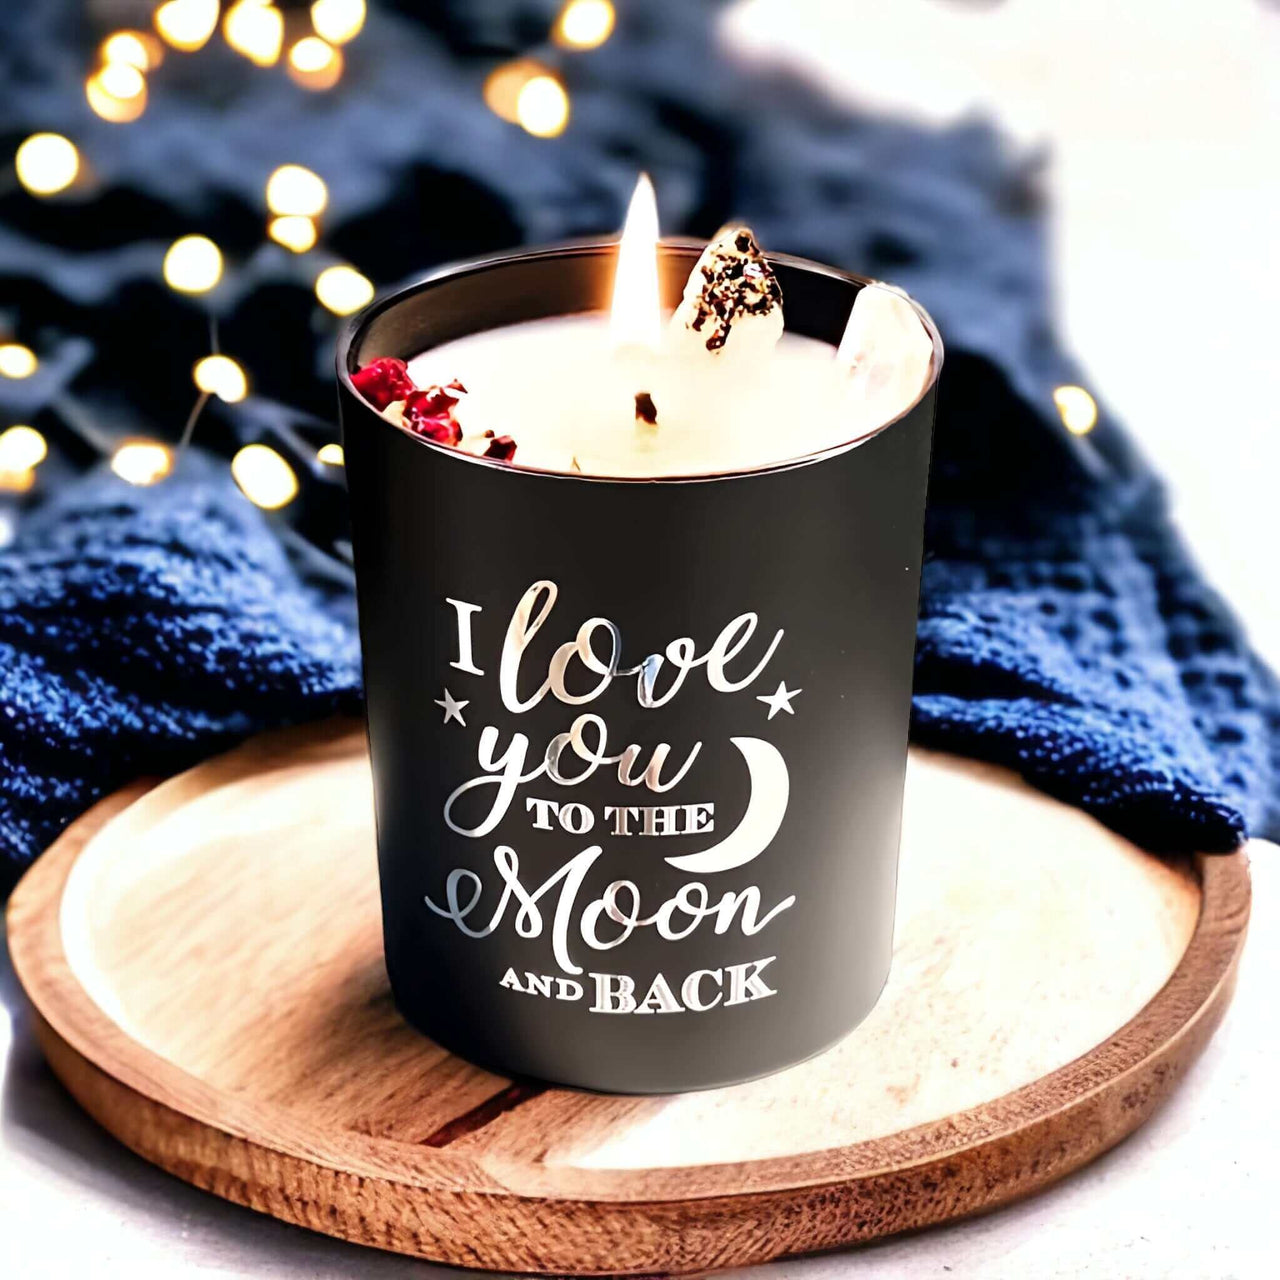 I Love you to the Moon and Back - Rainbow Moonshine Crystal Candle - A$49 Enchanting Aromas